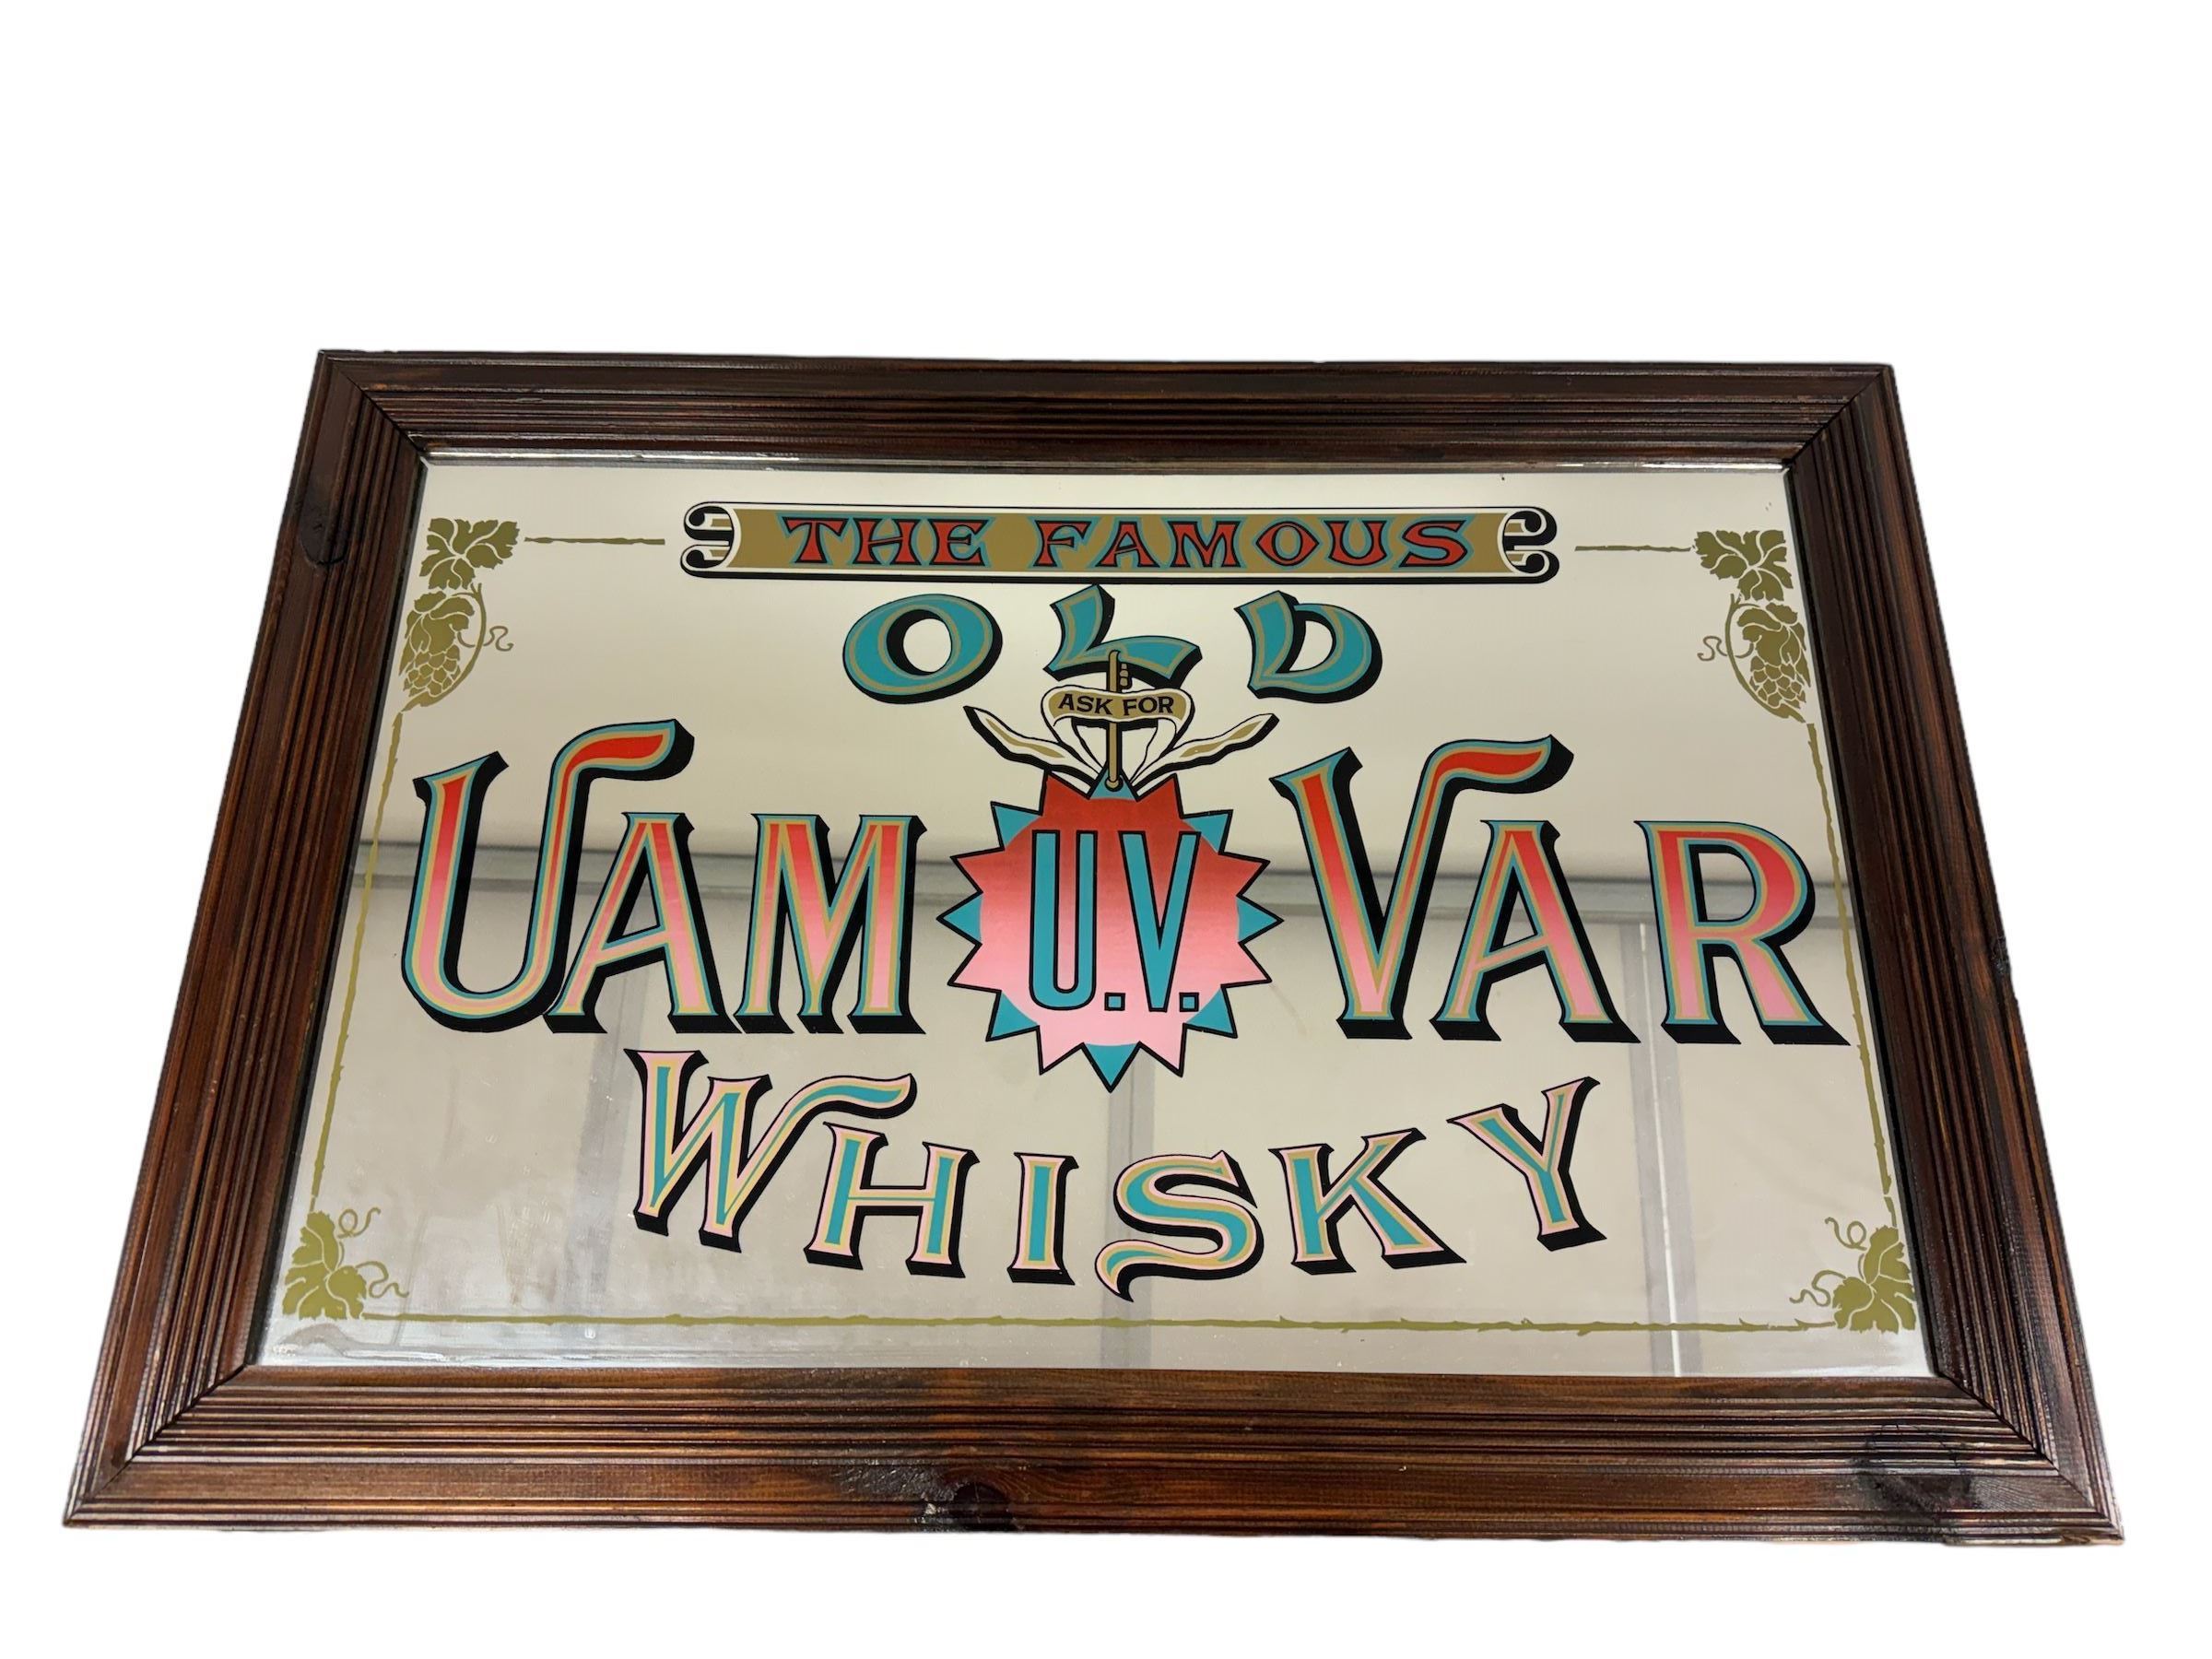 The Famous Old Uam Var Whisky advertising mirror